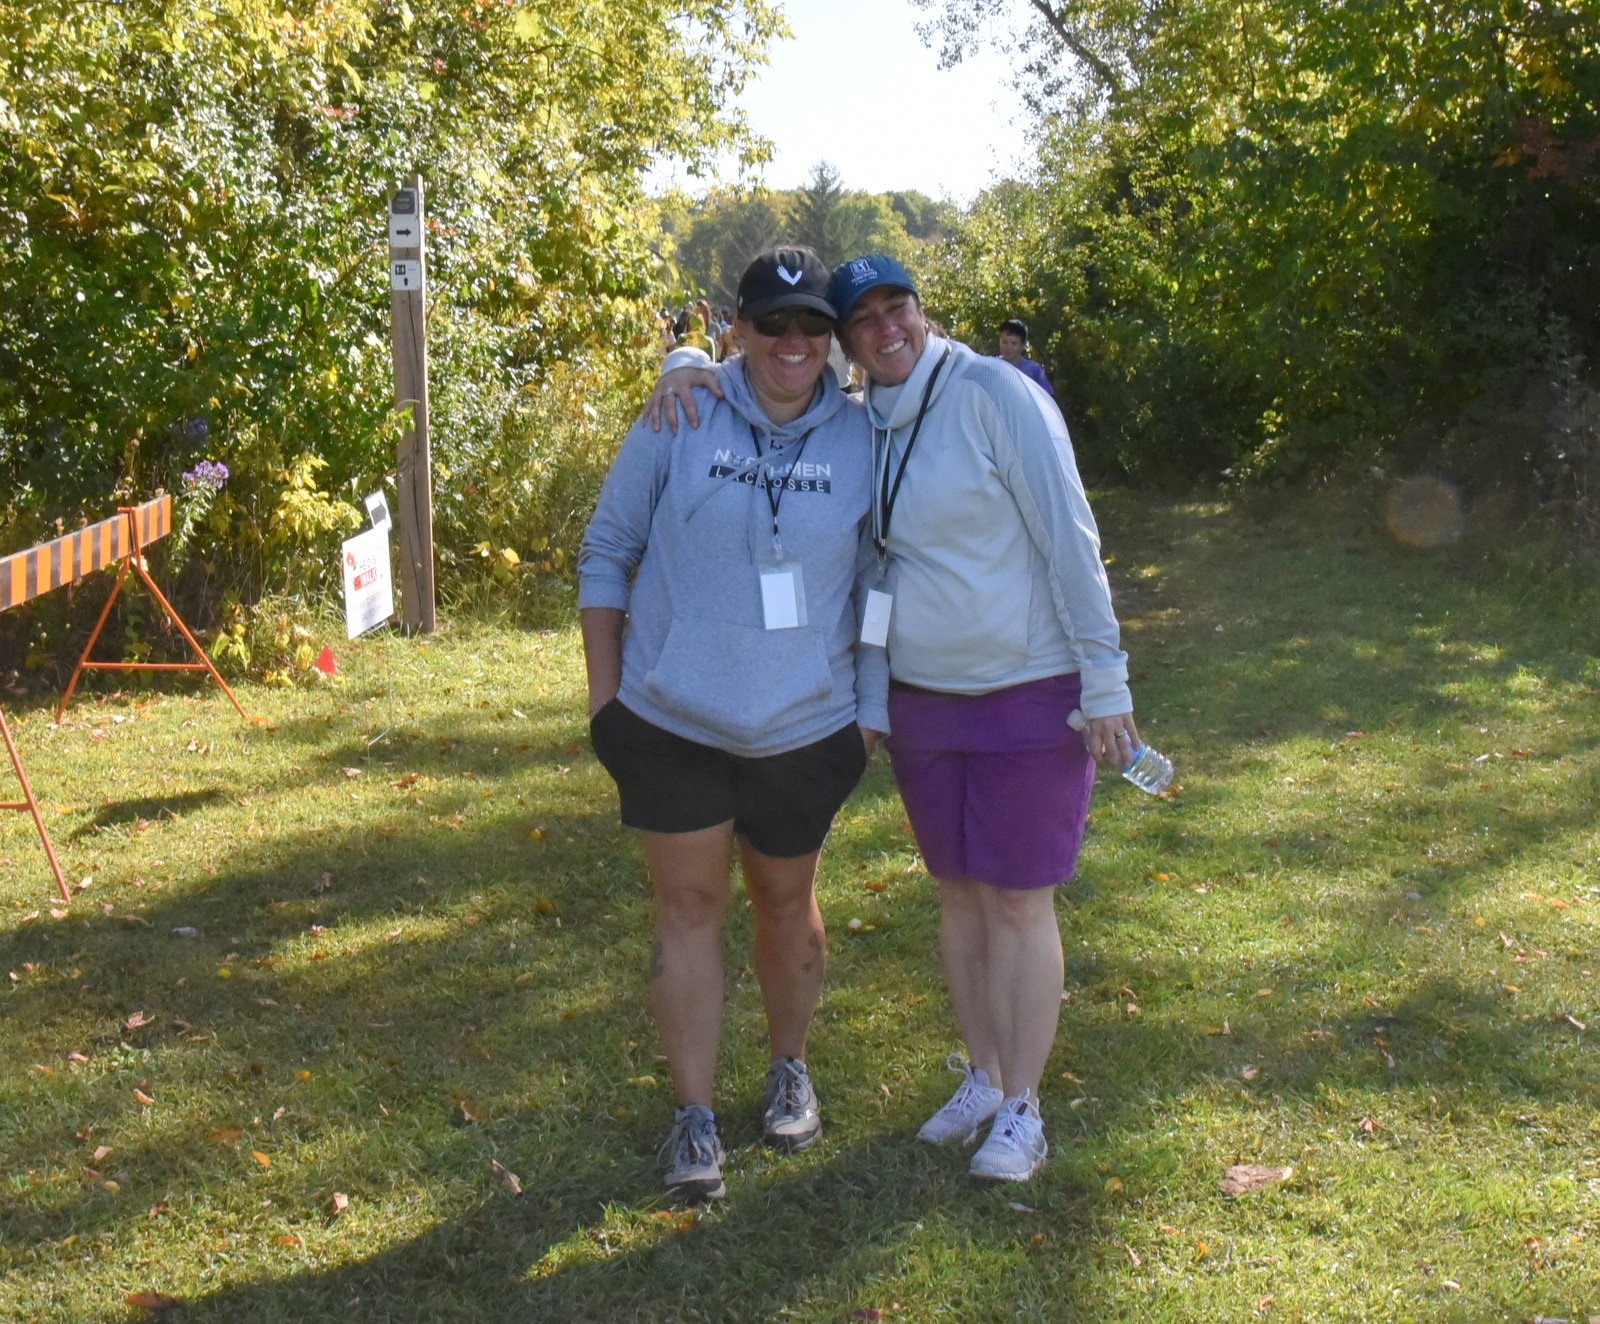 Kristy and Dana smiling together getting ready to lead the walk for Heidi's Walk for Hope September 2023.